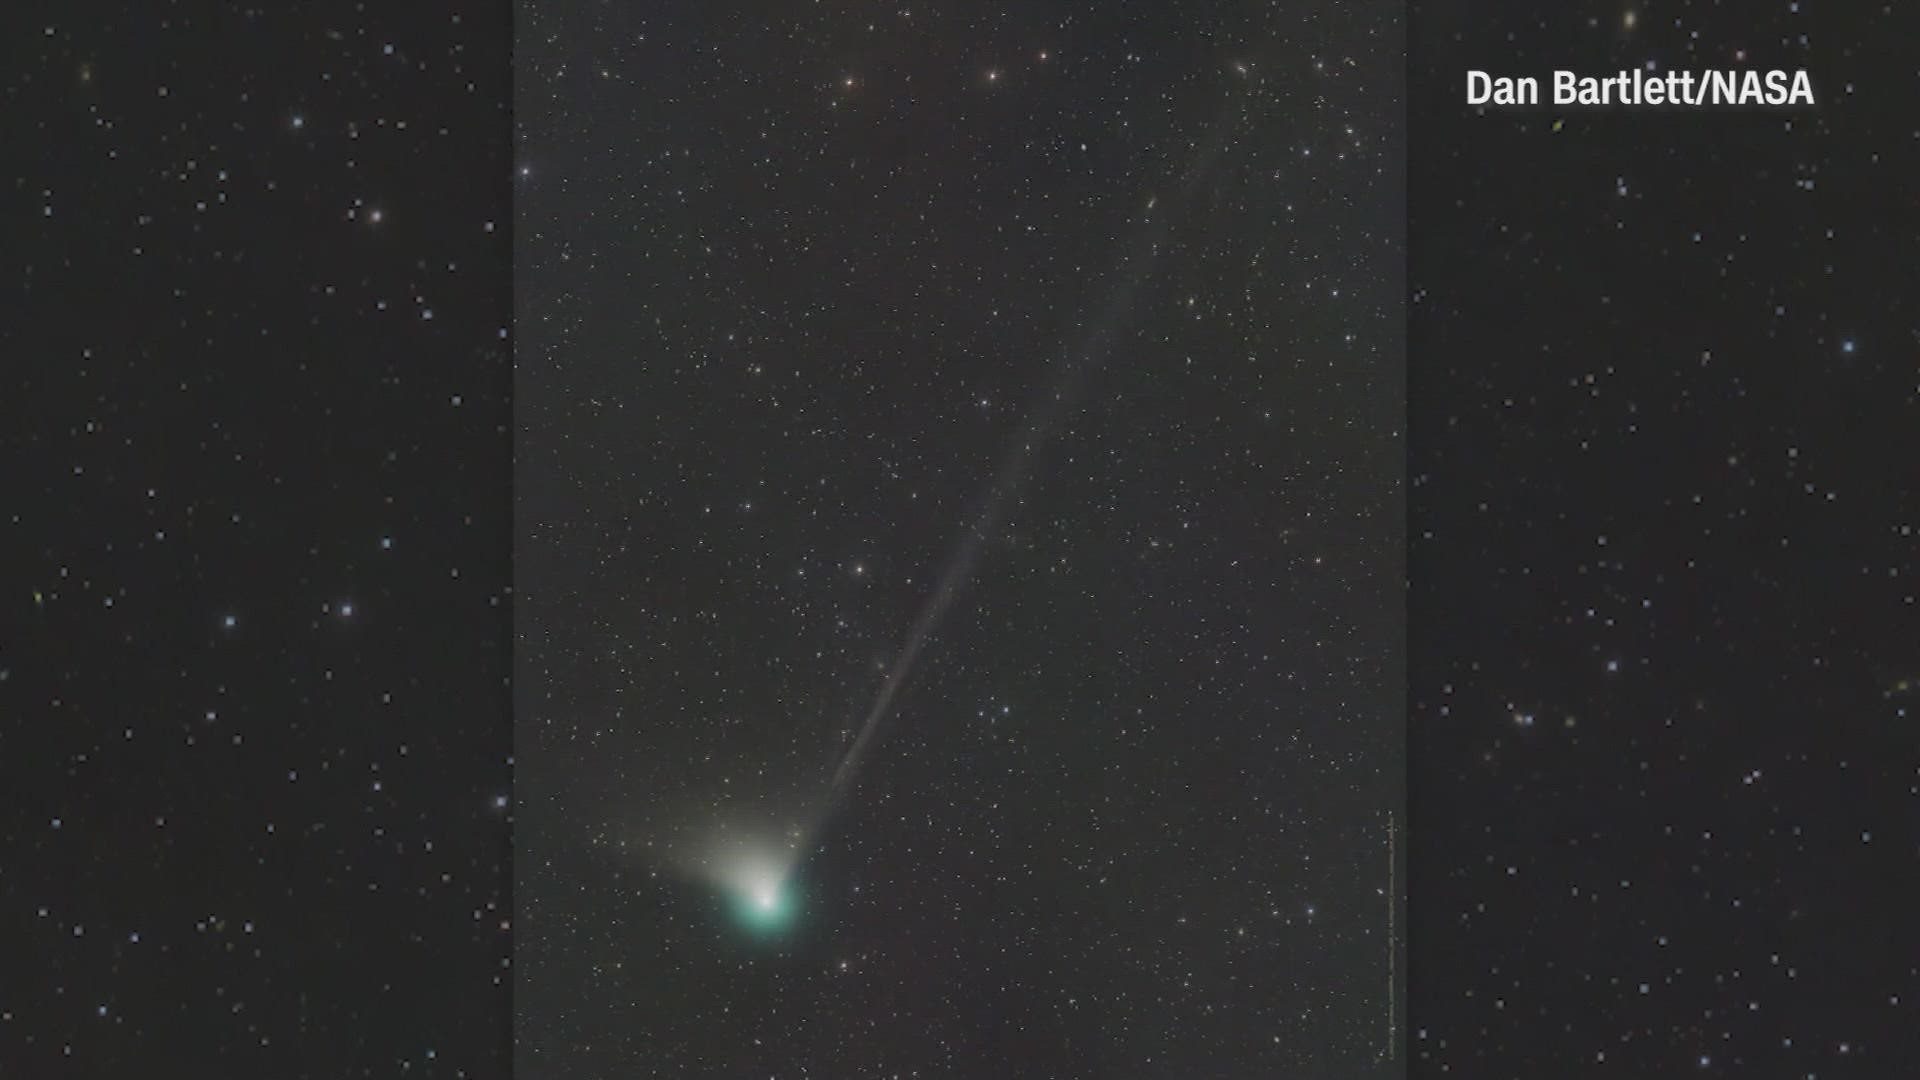 This newly discovered "icy visitor" is headed to a night sky near you.